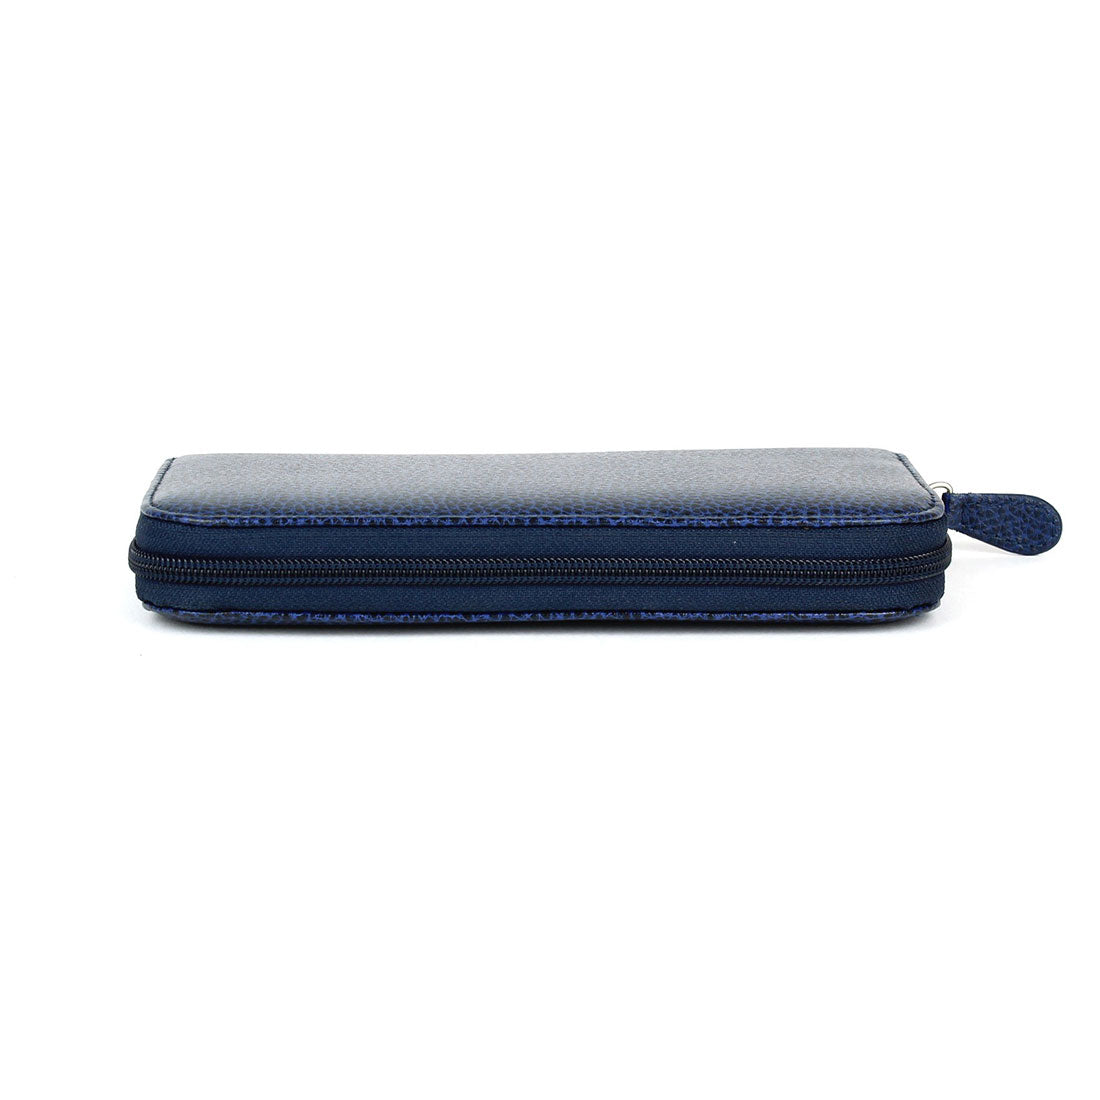 Wallet / Clutch - Navy#colour_laurige-navy